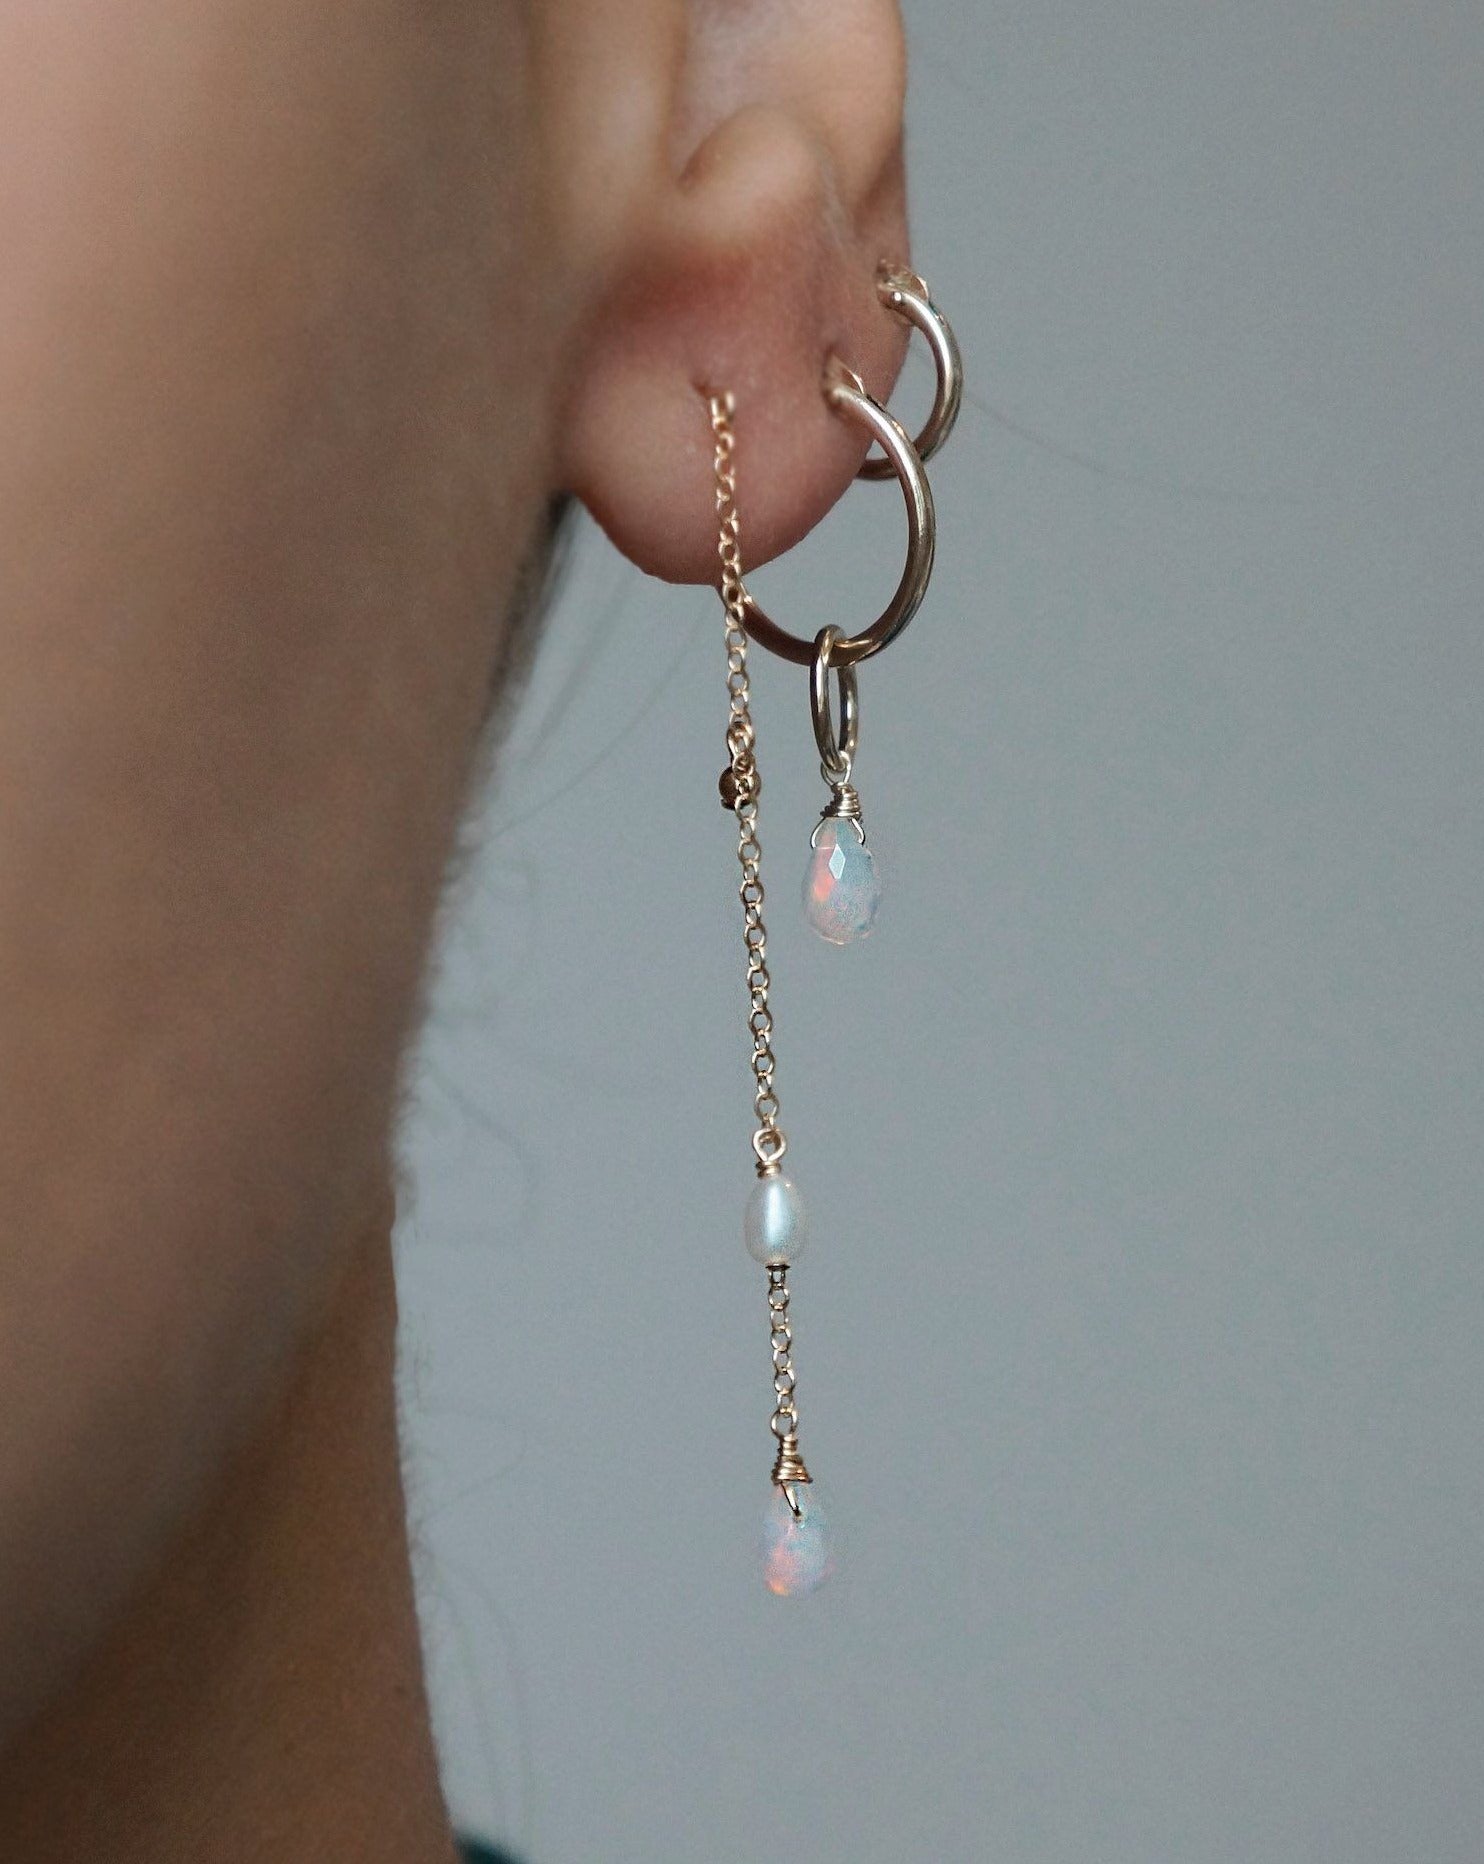 Lelu Earrings by KOZAKH. 14K Gold Filled drop style stud earrings, with drop length of 1.75 inch, featuring a 3-4mm white rice Pearl, a 5-6mm faceted Ethiopian Opal droplet, and a 2mm seamless bead.